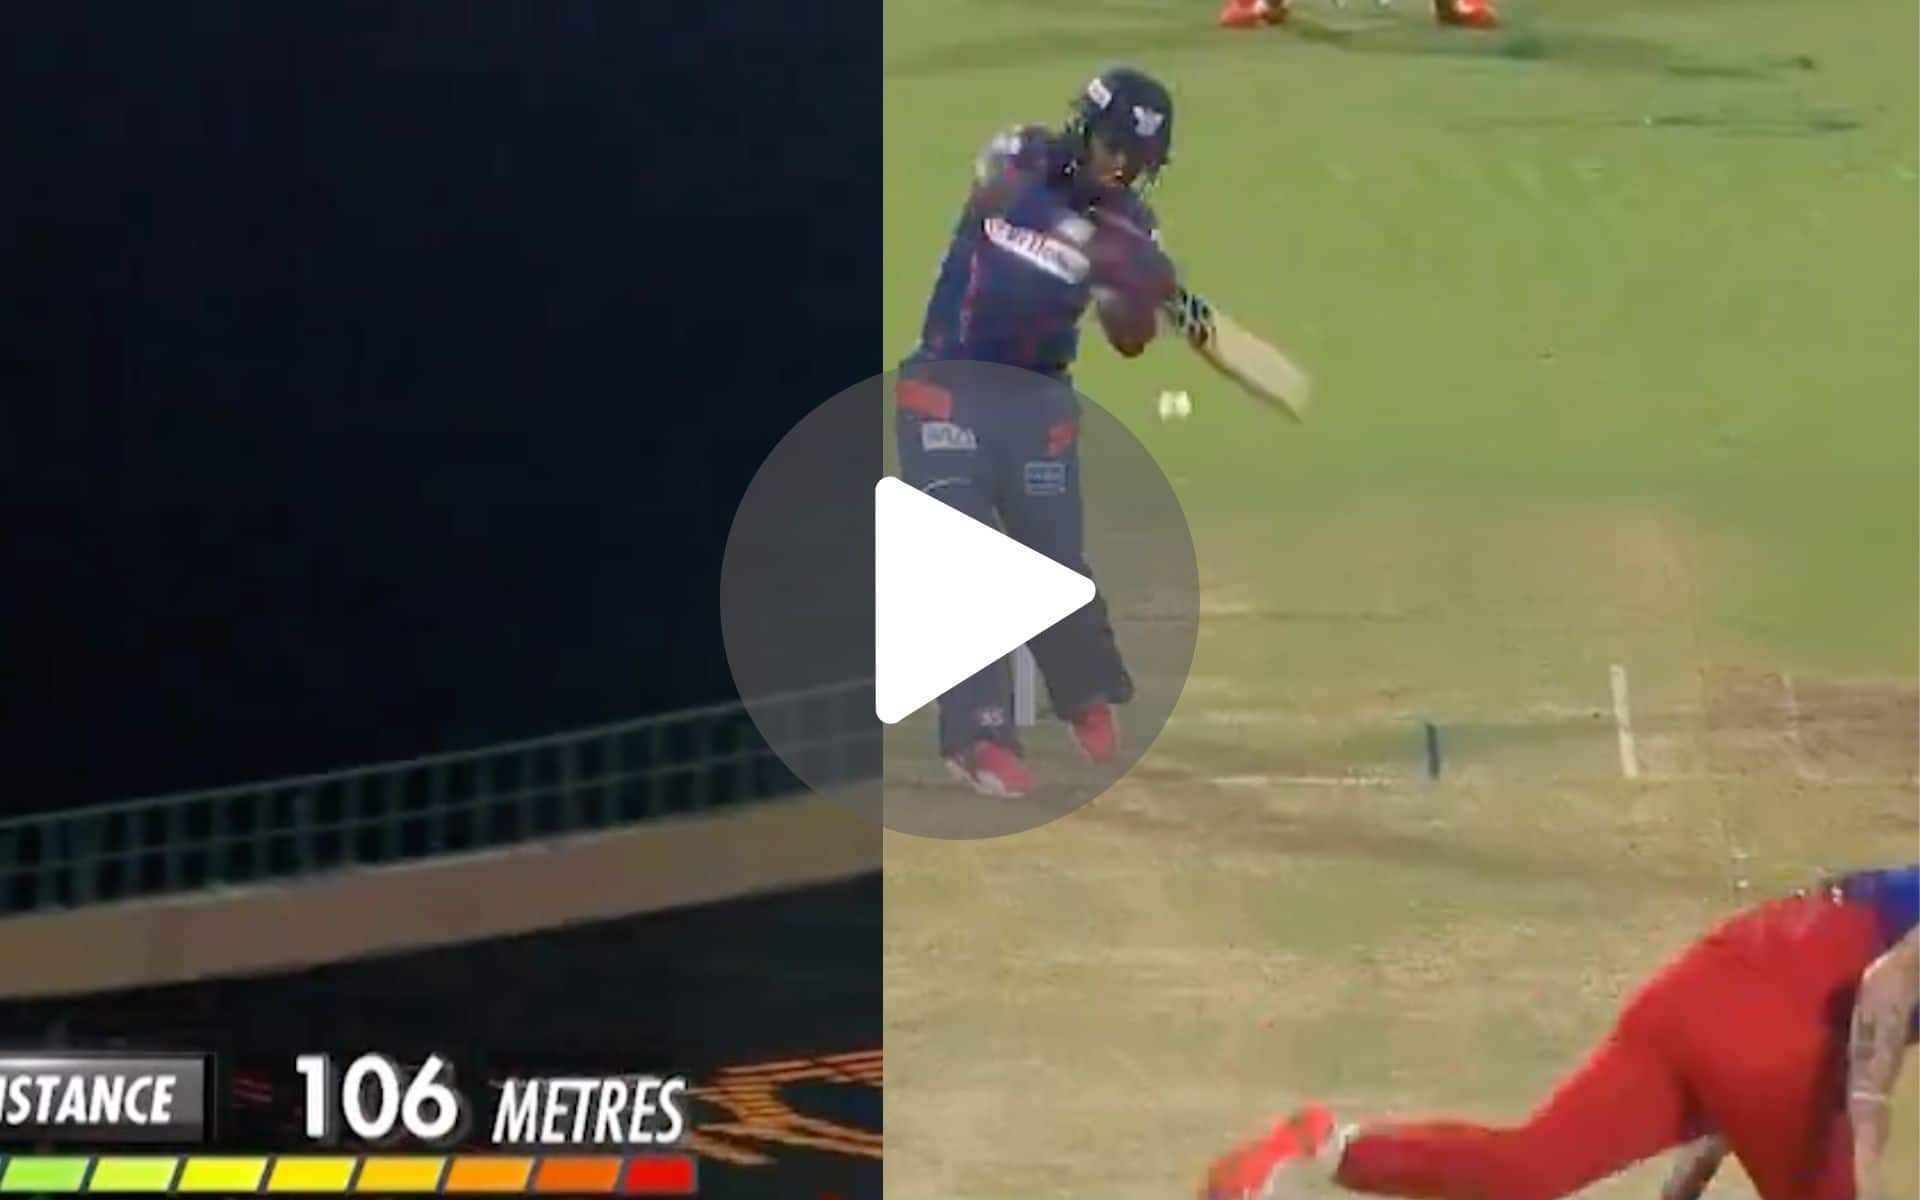 [Watch] 6,6,6 - Pooran Takes RCB To Cleaners As He Slams 106-Metre Six Out Of The Ground